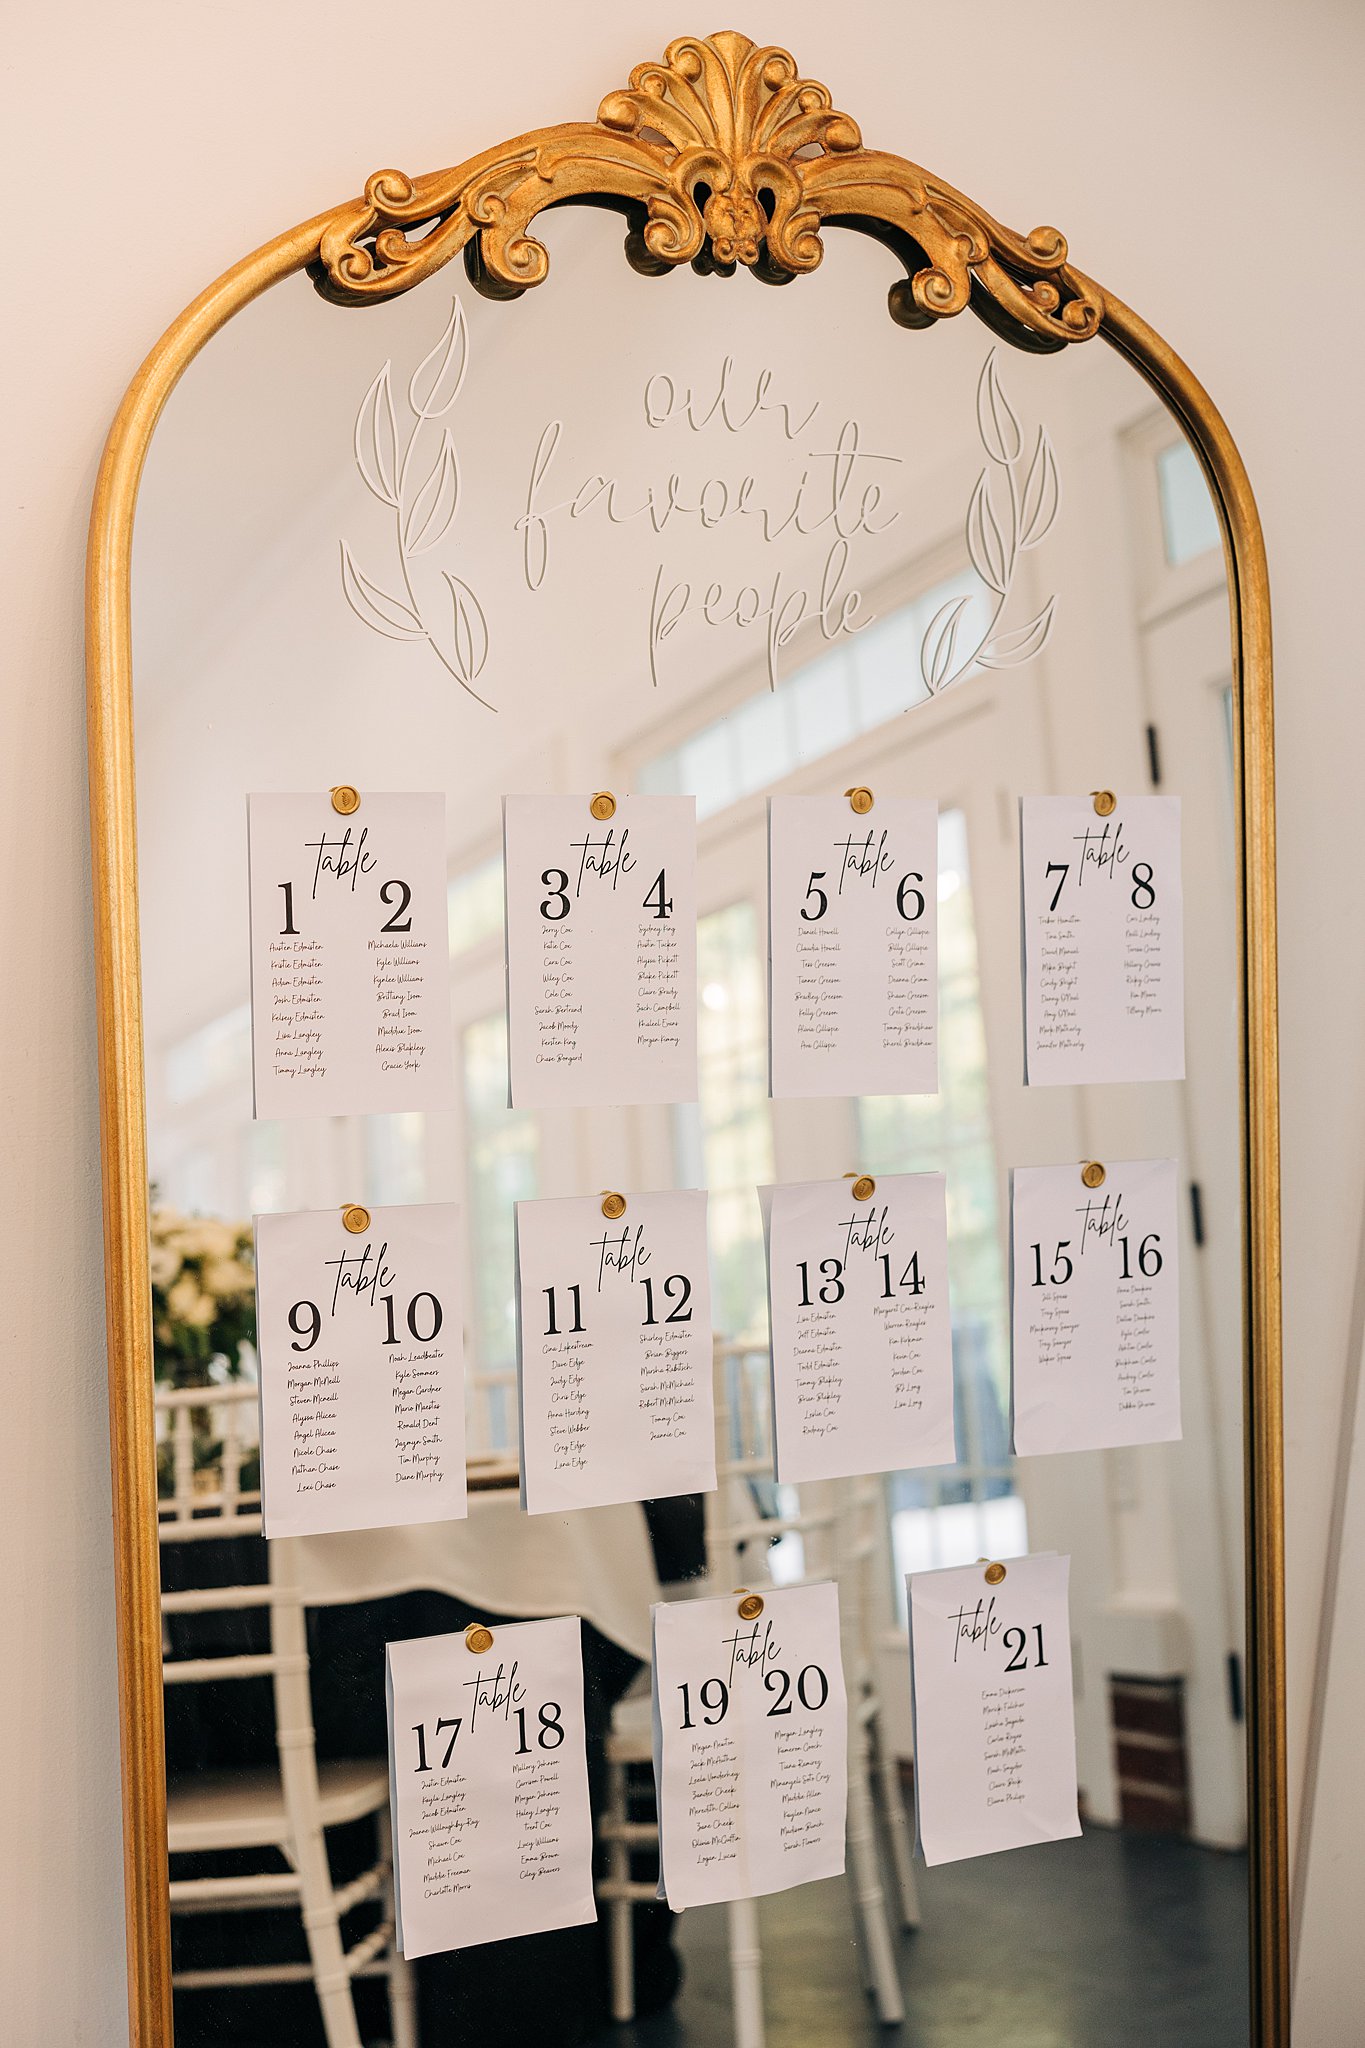 Details of a table assignment sign built onto a mirror